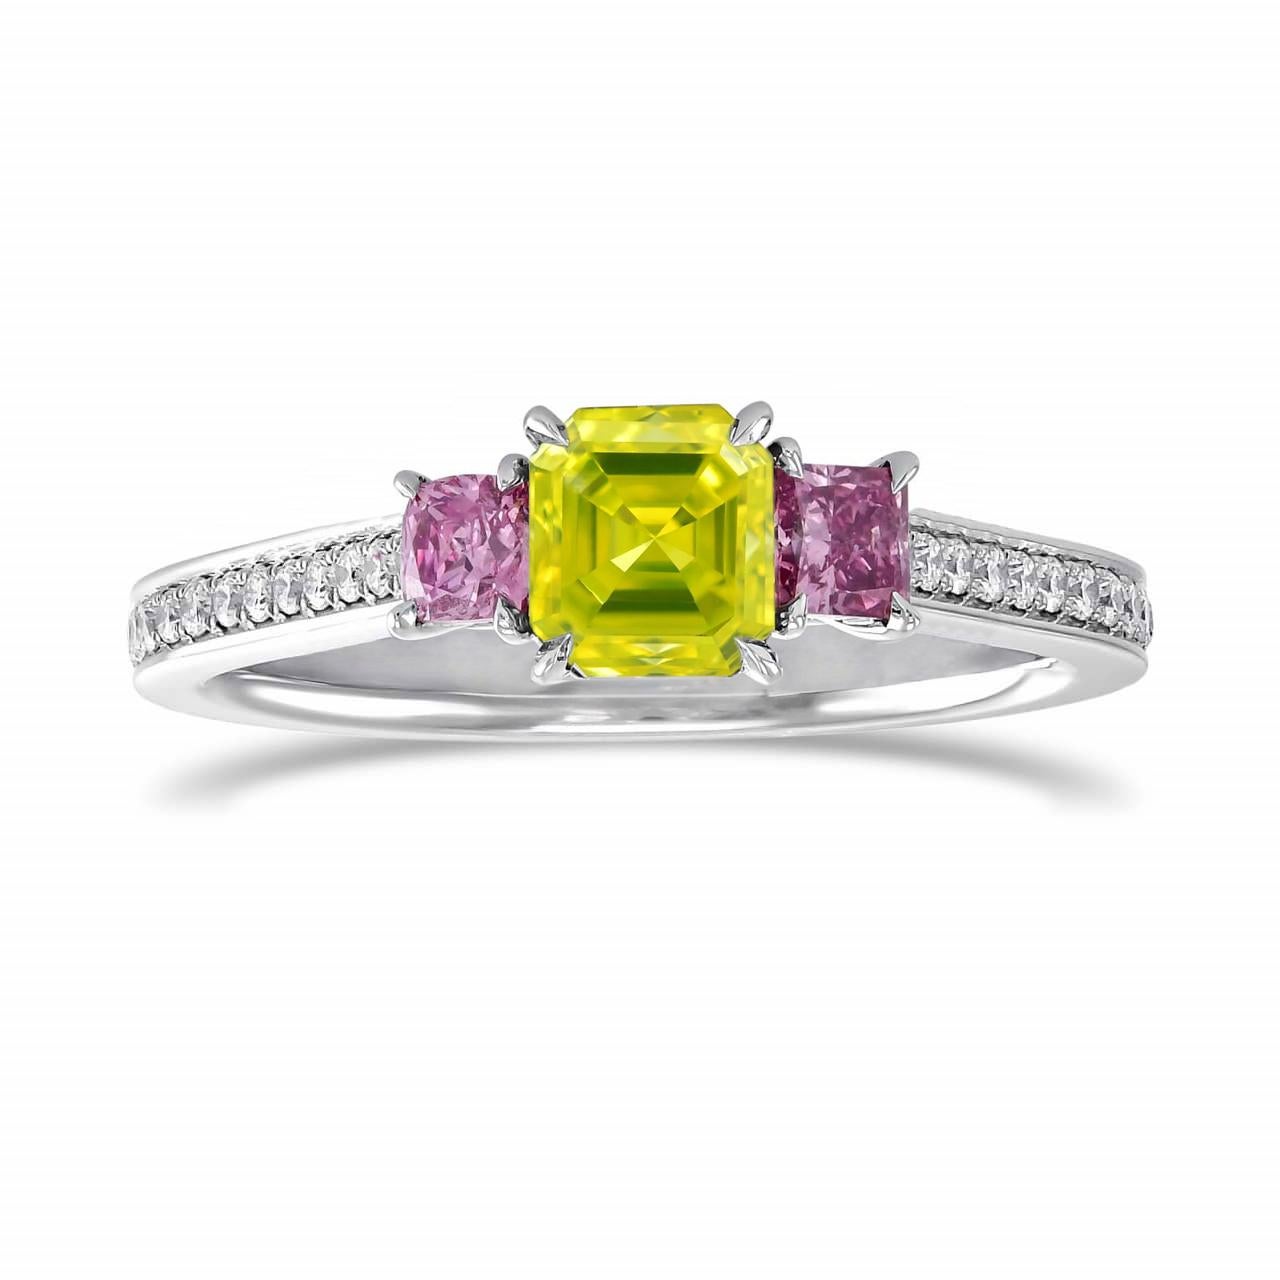 Fancy Vivid Yellow Green 0.47 carat Square Emerald cut. Treated color.
GIA certificate 15830722.
Centering white diamond on white 18K gold ring.


Fancy Vivid Yellow Green 
Dimensions: 4.05 x 3.90 x 3.61 mm.

Can be size upon request. About 10 days